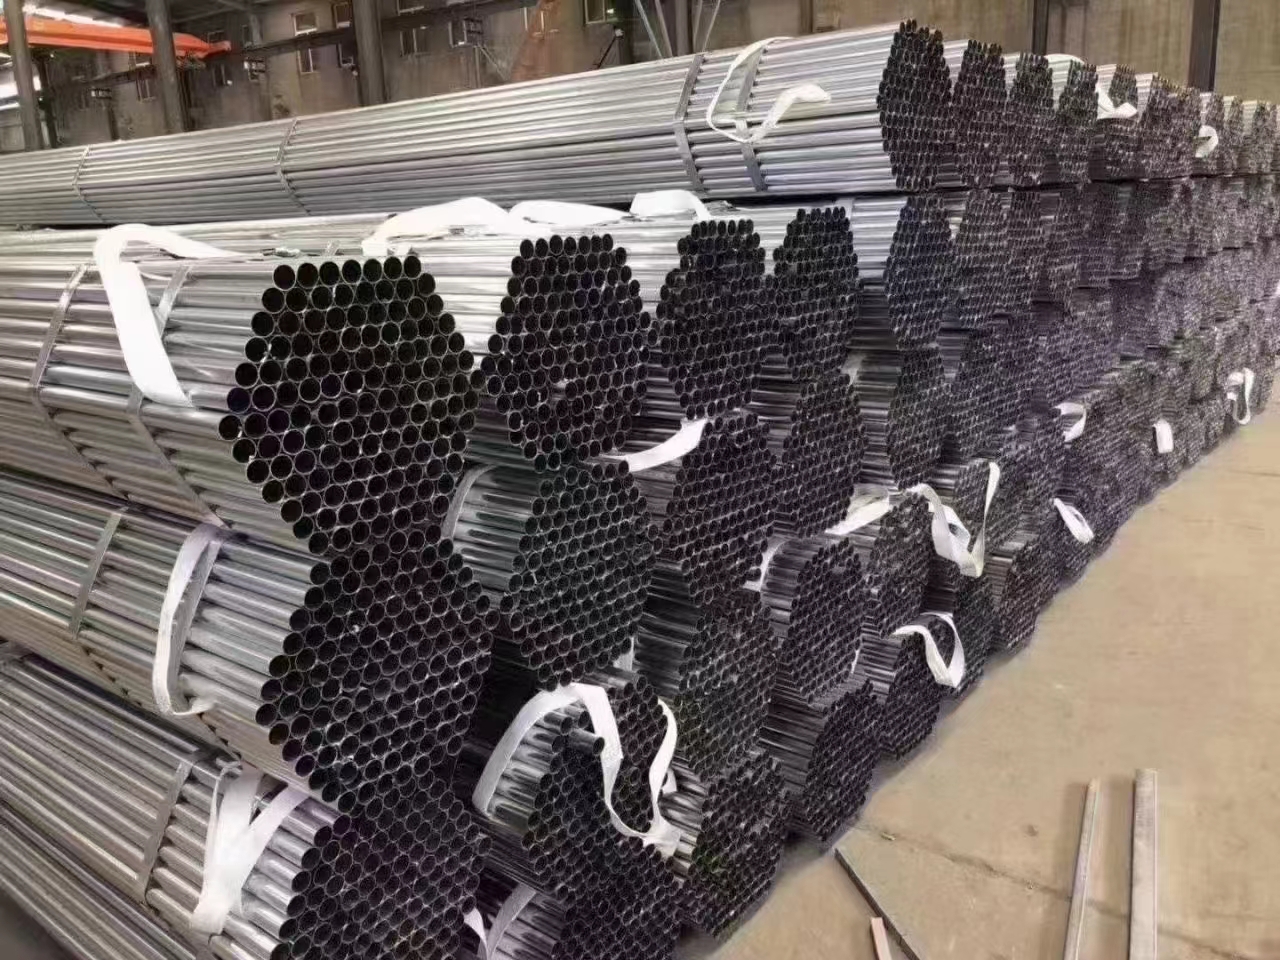 Seamless Steel Pipe And Tube Hot Sale High Quality Carbon Steel Seamless Pipe